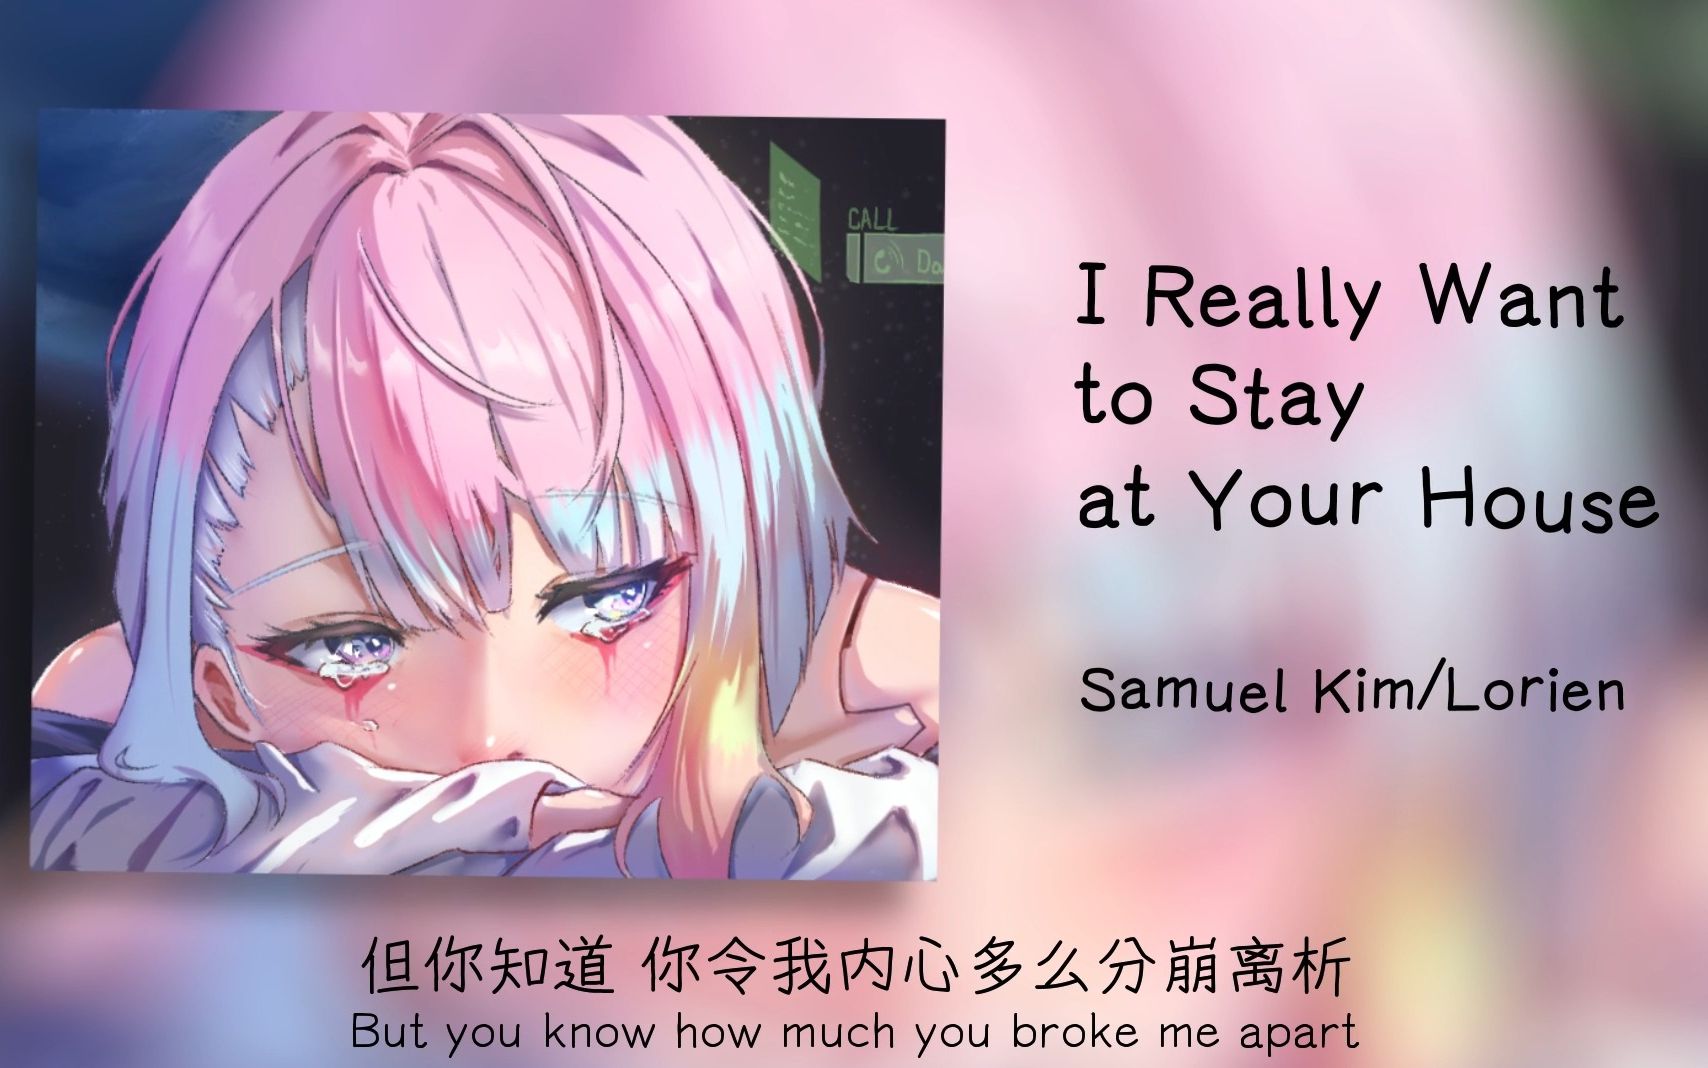 《I Really Want to Stay At Your House》||“你从未听过的全新版本”